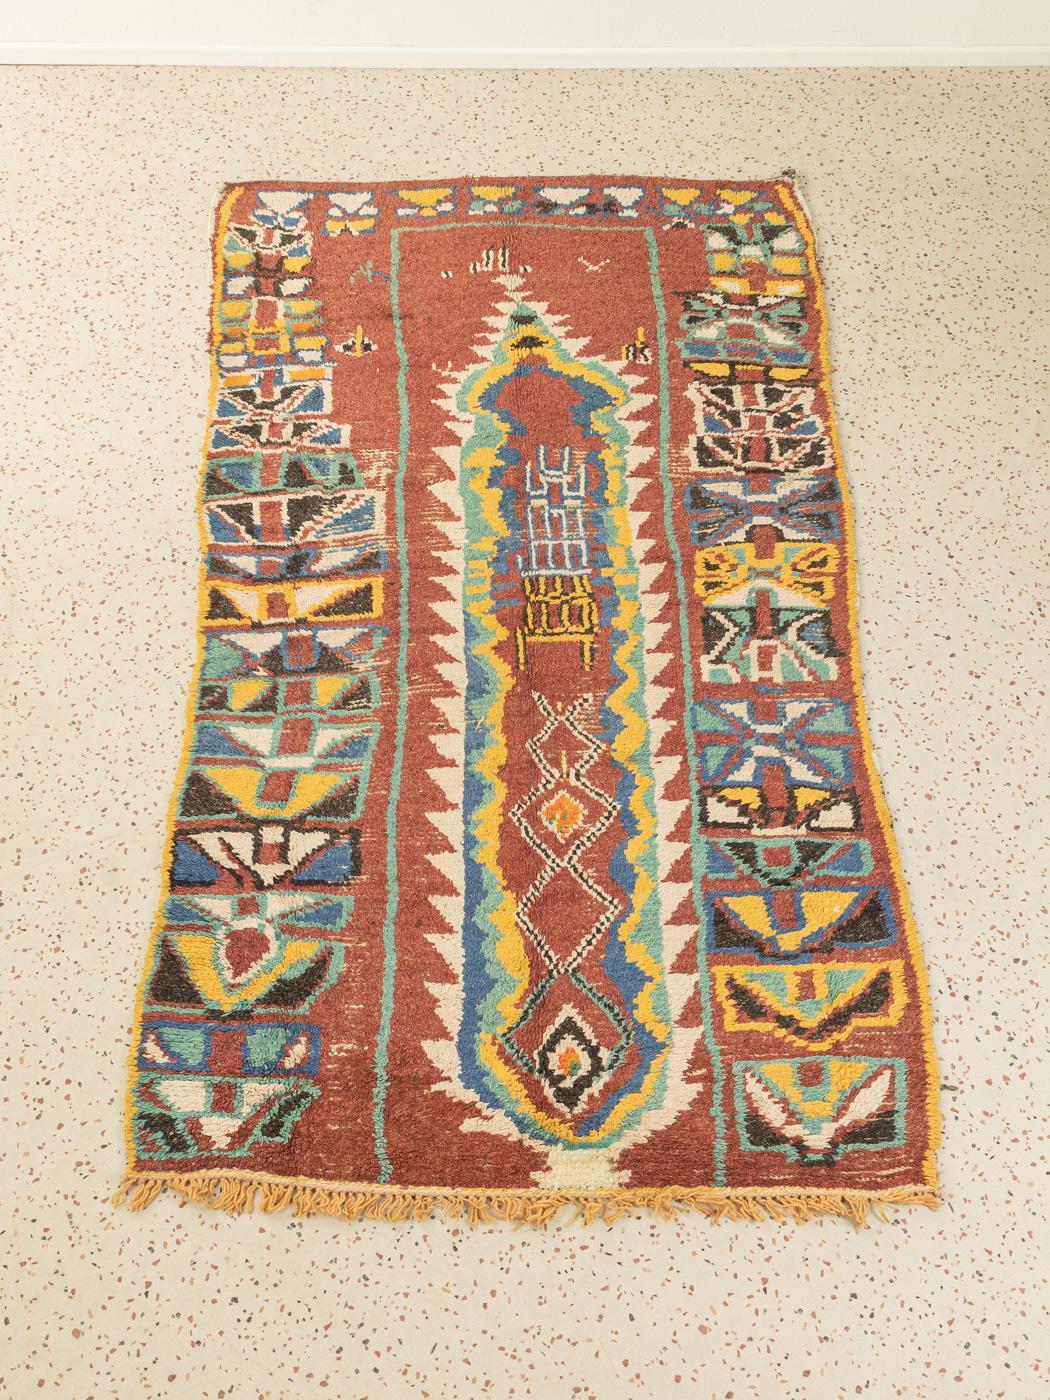 Hand-Woven Vintage Moroccan Azilal Berber Rug High Atlas Mountains Red Yellow Green Beige For Sale